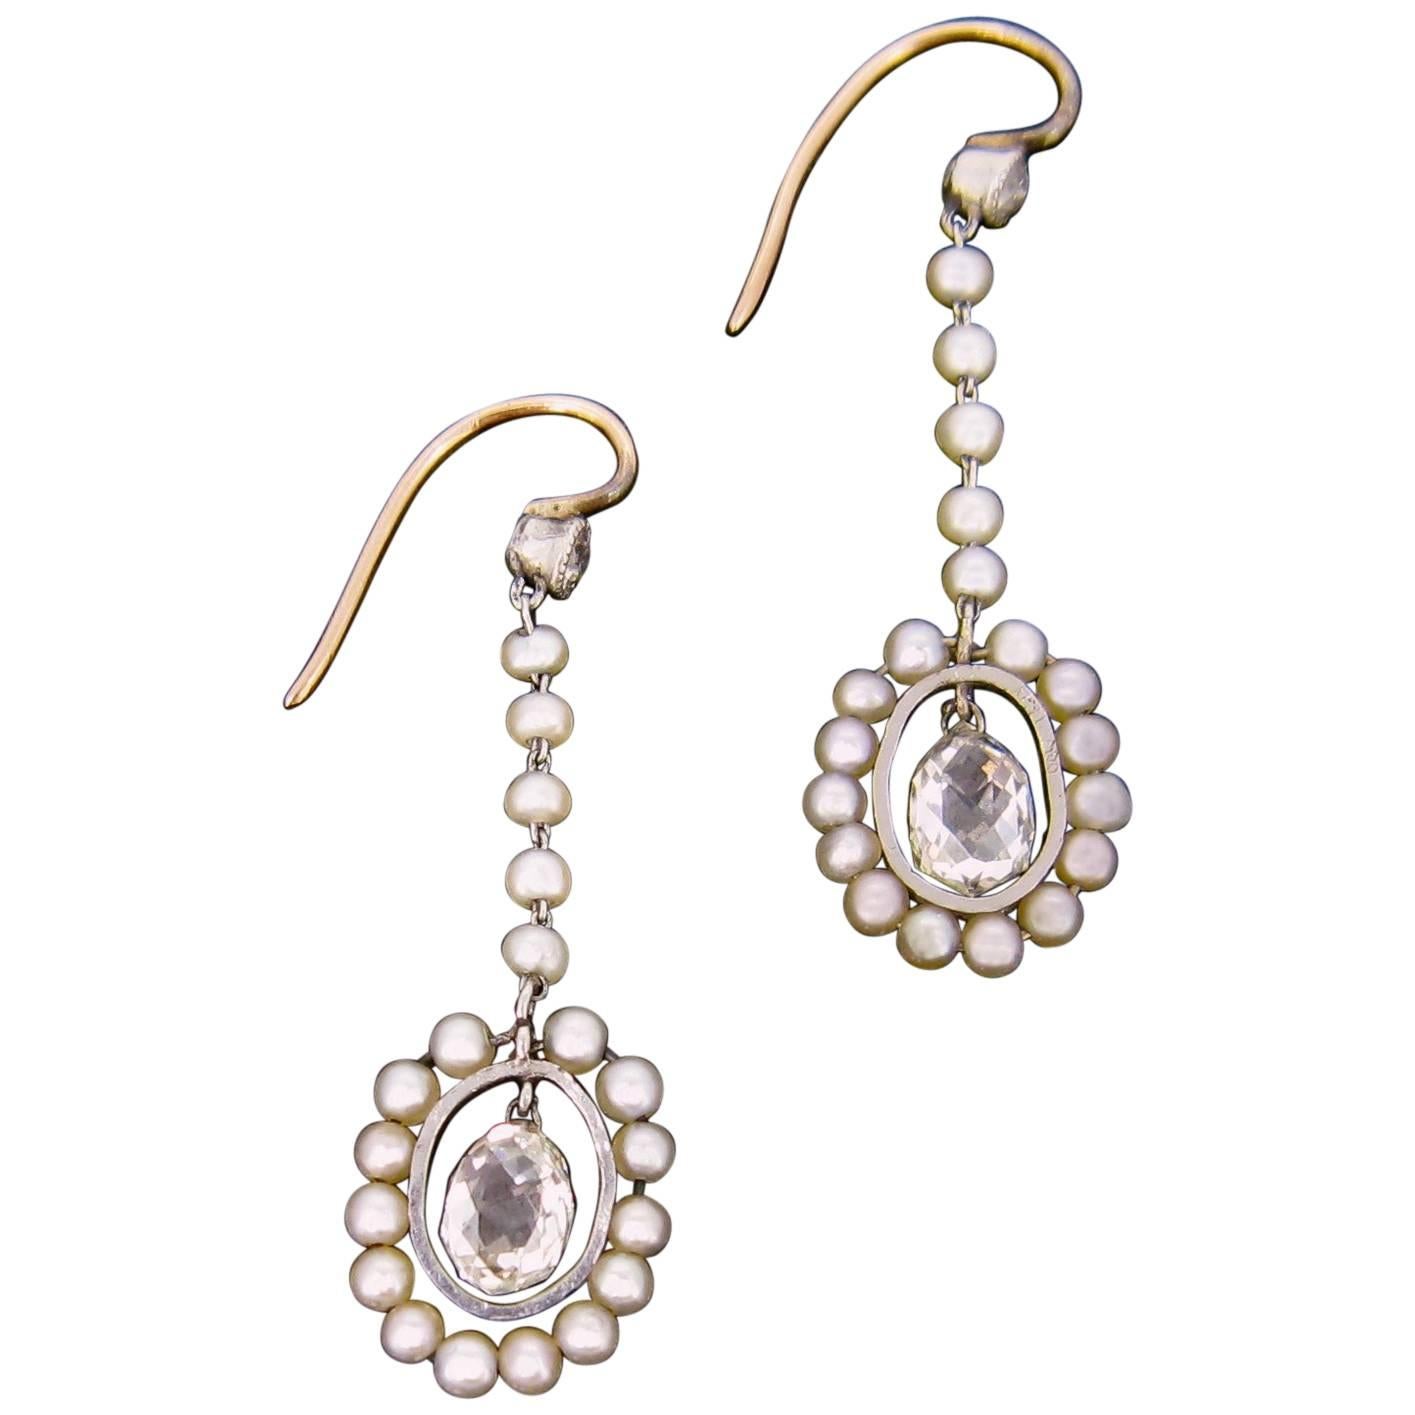 Briolette Cut Diamonds and Pearls Earrings Gold and Platinum, circa 1910